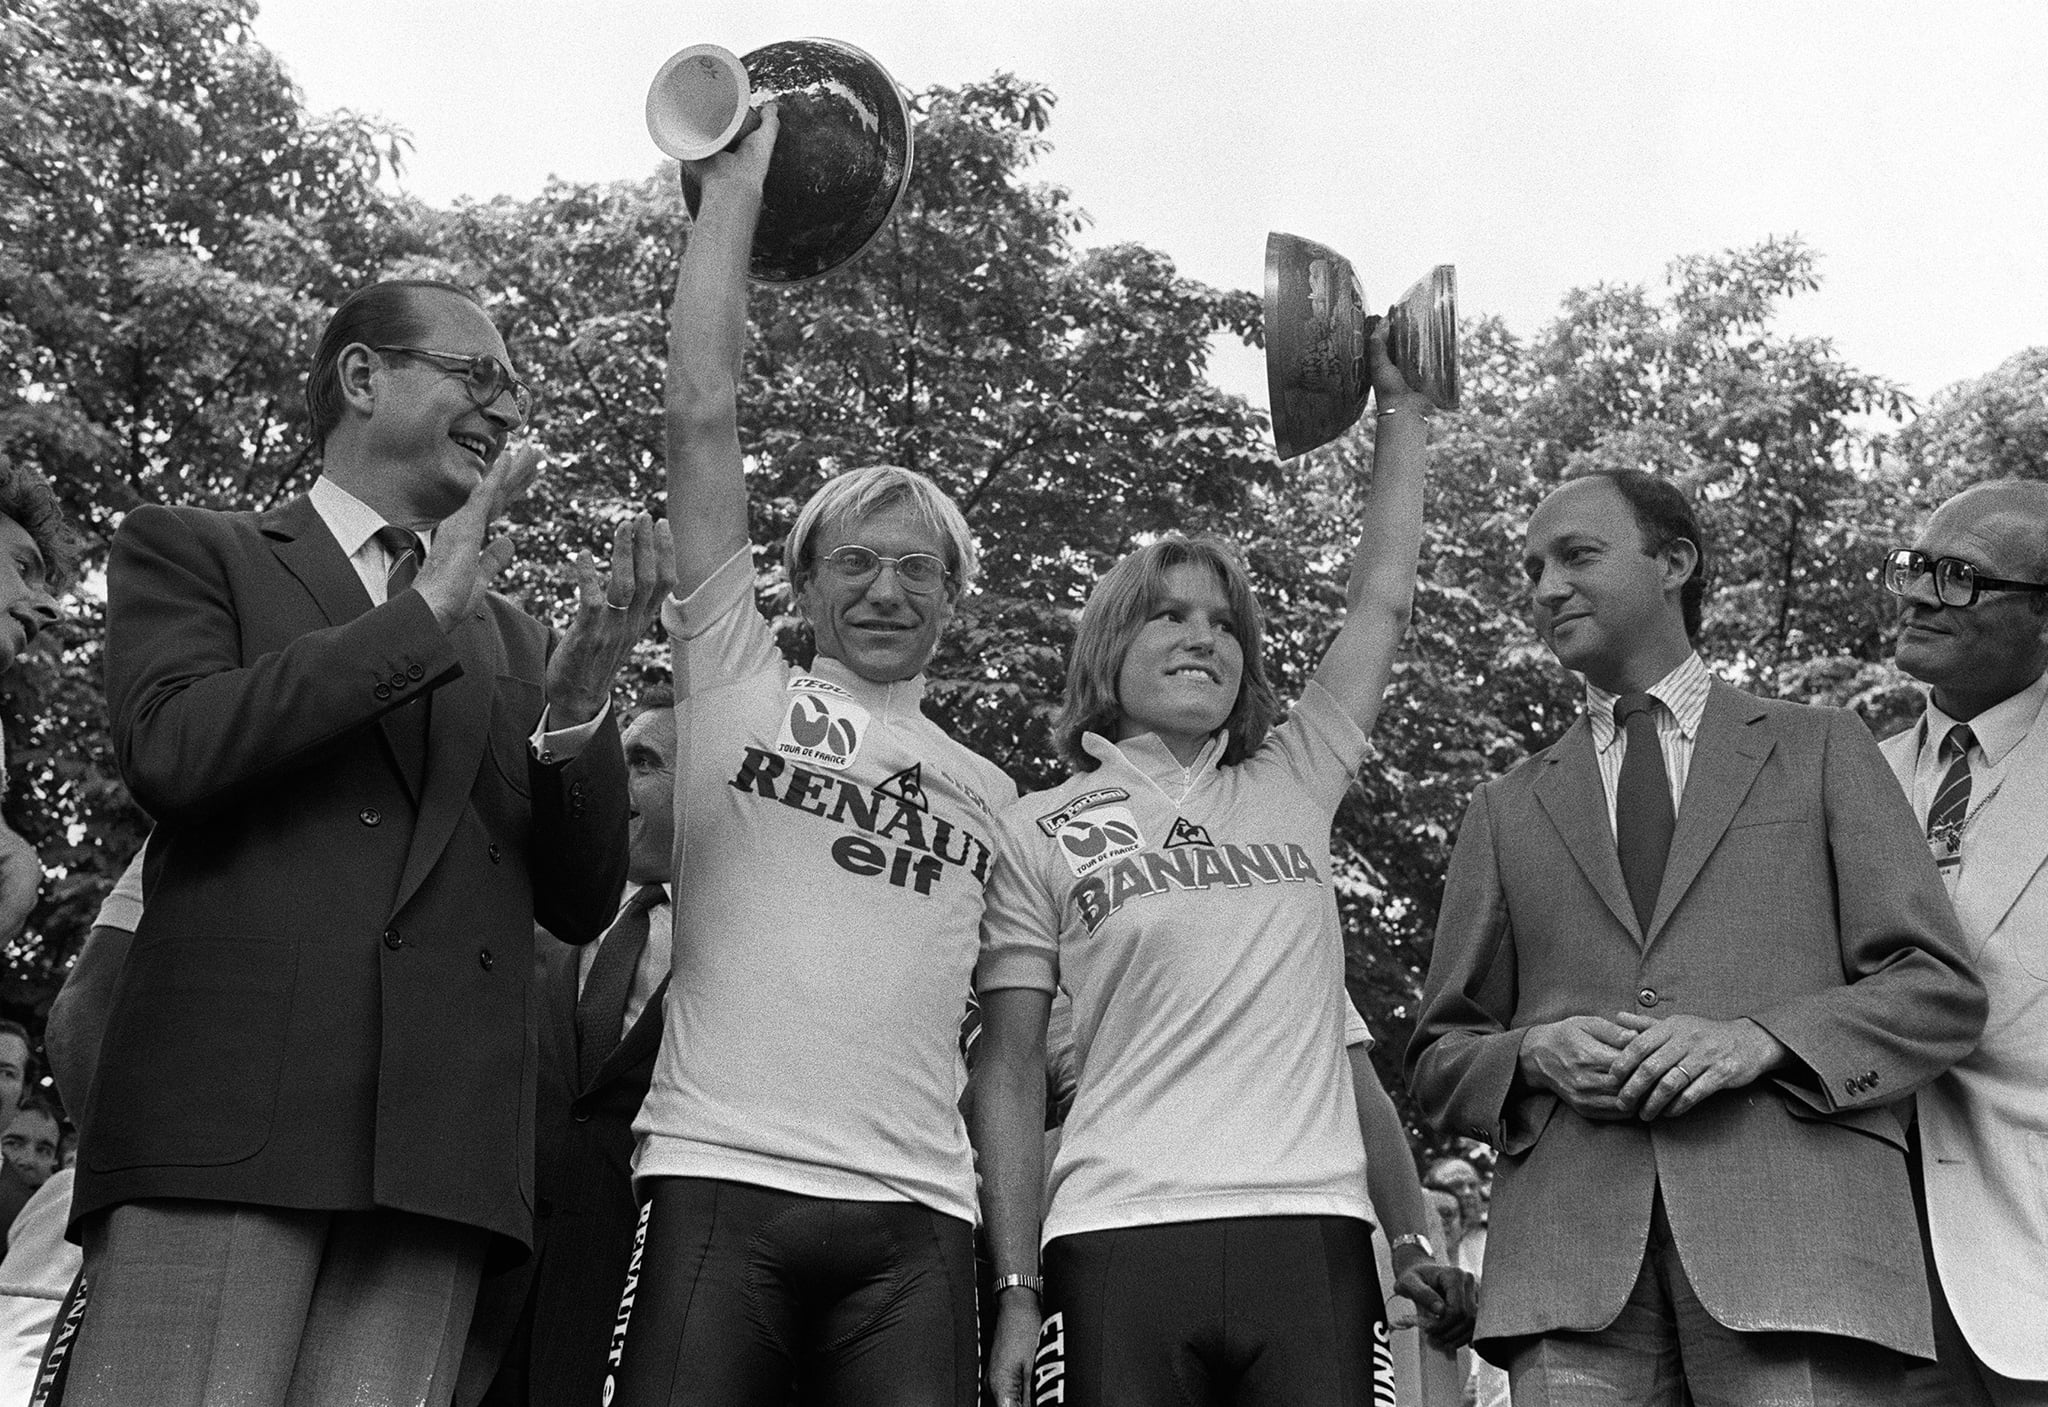 Tour de France winners Frenchman Laurent Fignon and Marianne Martin of the United States smile on the podium on July 22, 1984 in Paris, surrounded by Paris Mayor Jacques Chirac (L) and Prime Minister Laurent Fabius. Fignon reveals, on June 11, 2009 in Paris during the recording of a TV show released on June 14, that he suffers from and advanced stage cancer, but that there are no links with doping products. Fignon won the Tour de France in 1983 and 1984. AFP PHOTO FILES / AFP PHOTO / FILES        (Photo credit should read /AFP via Getty Images)